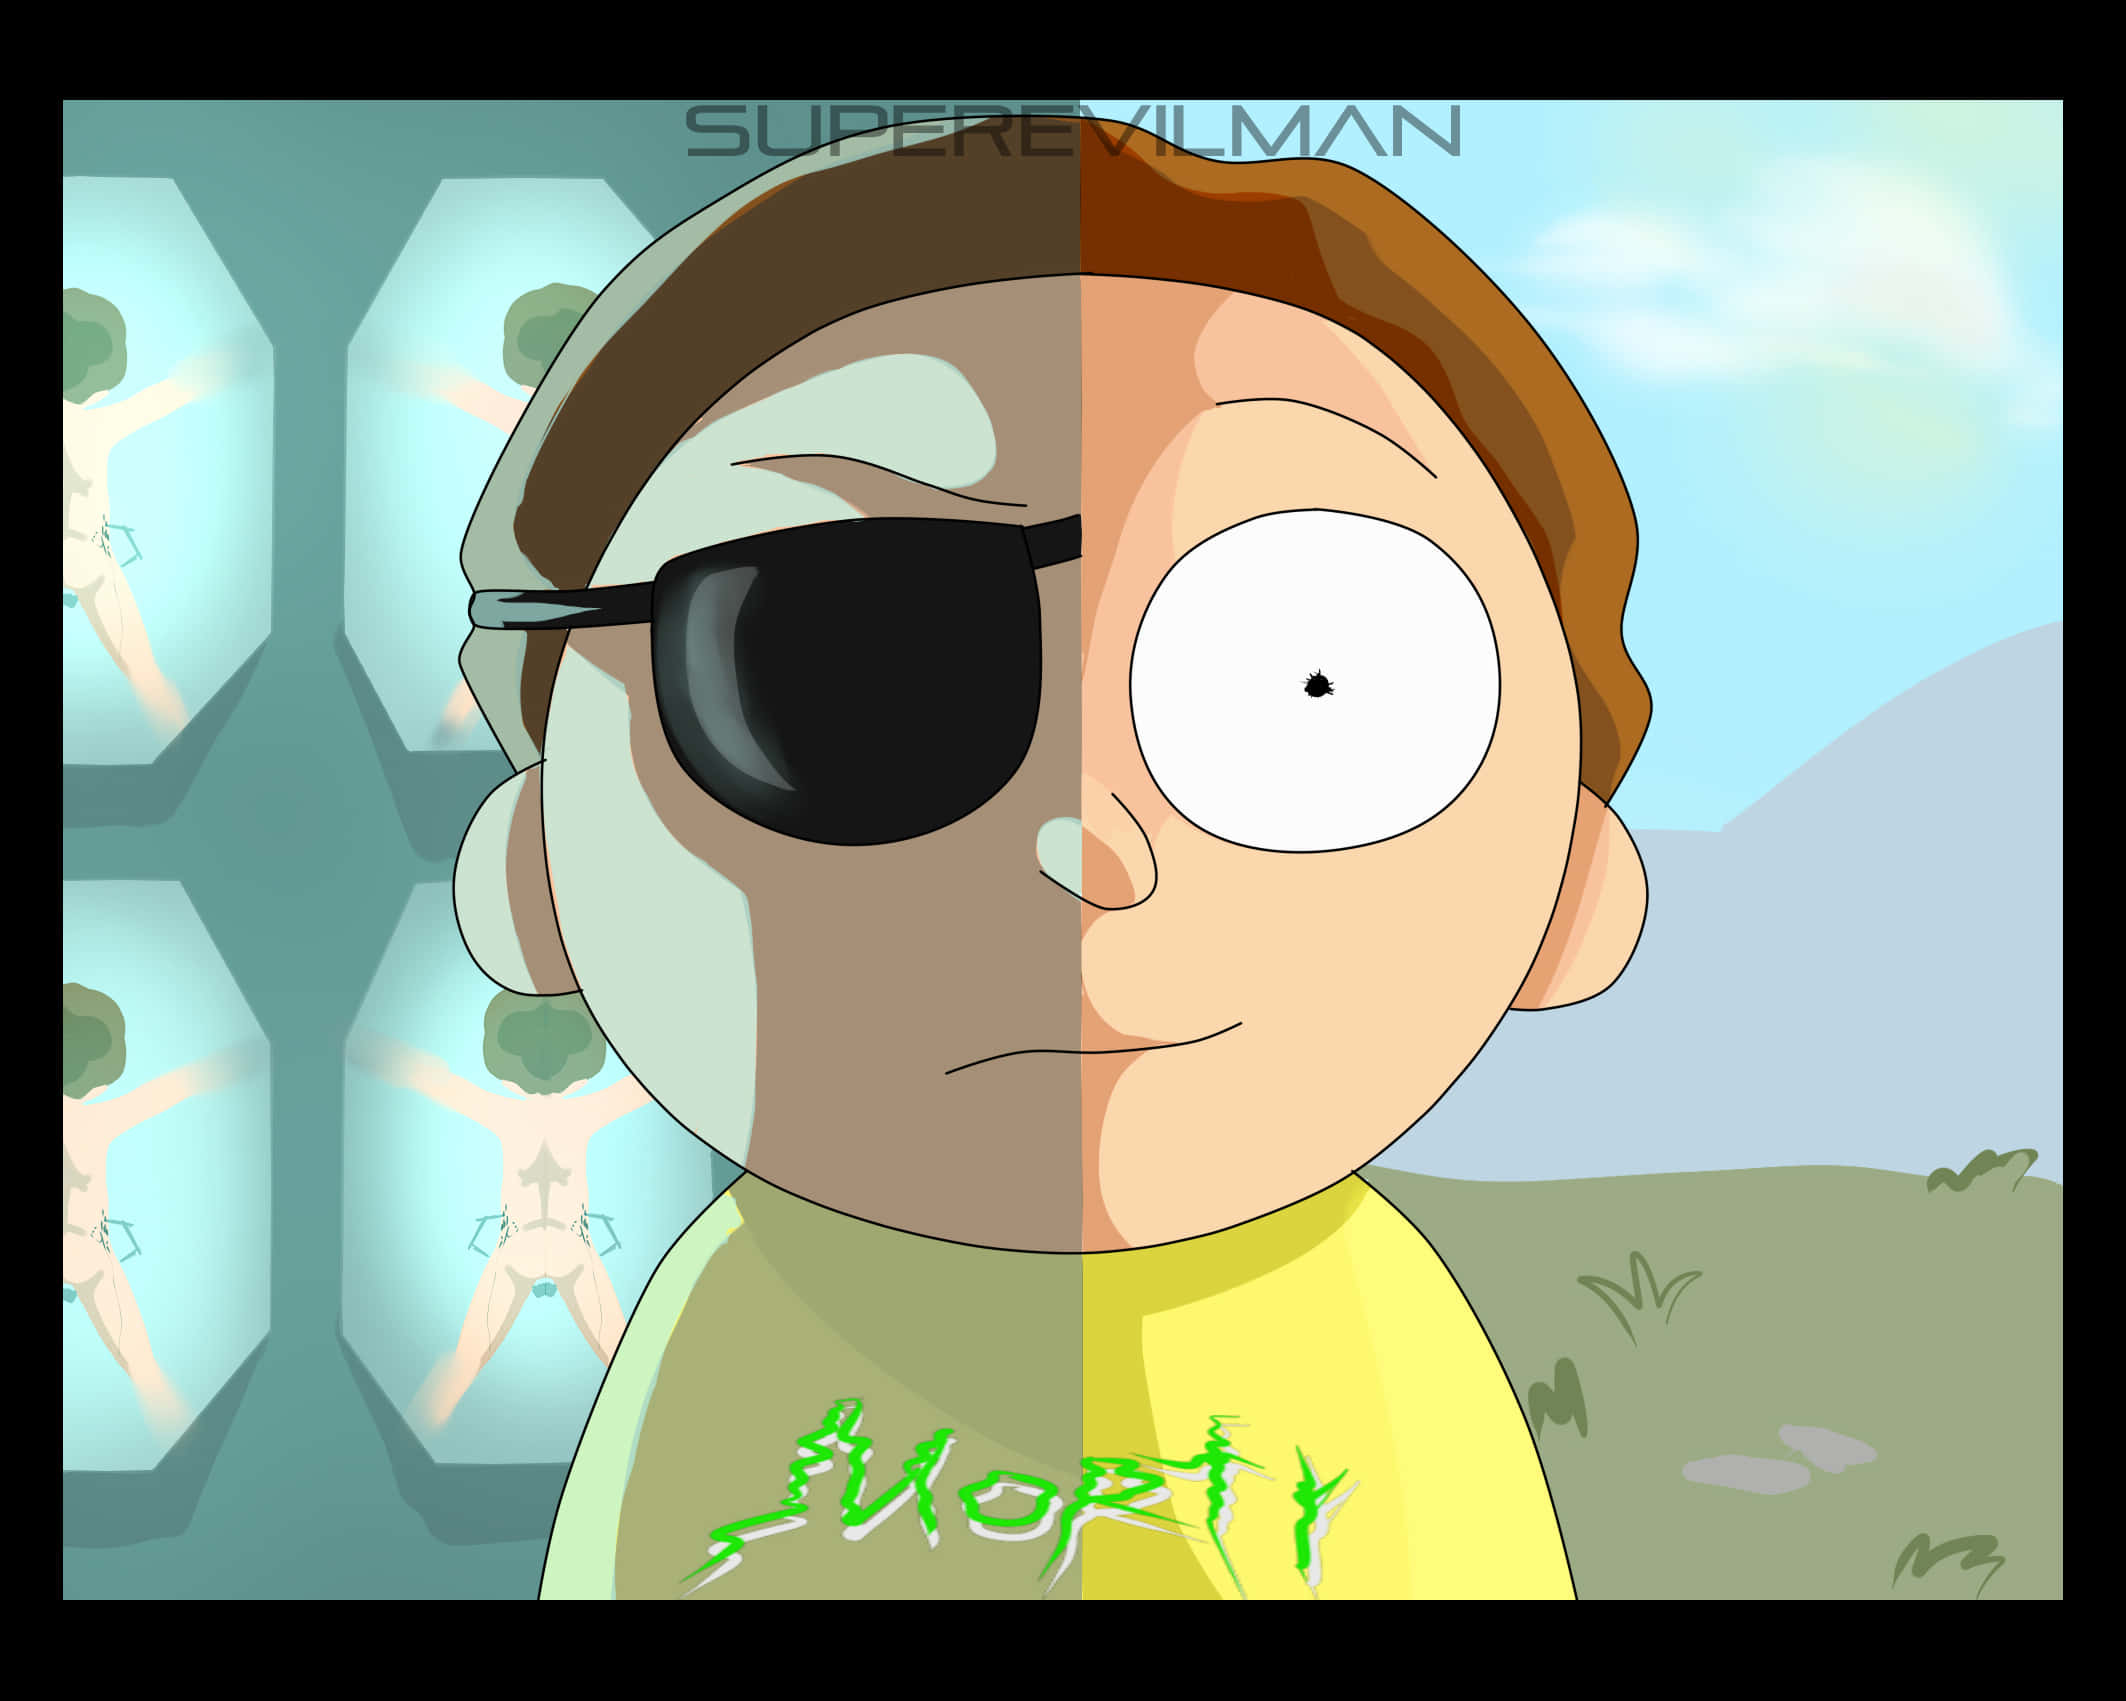 Evil Morty Standing Dominantly in a Detailed Hand-drawn Illustration Wallpaper